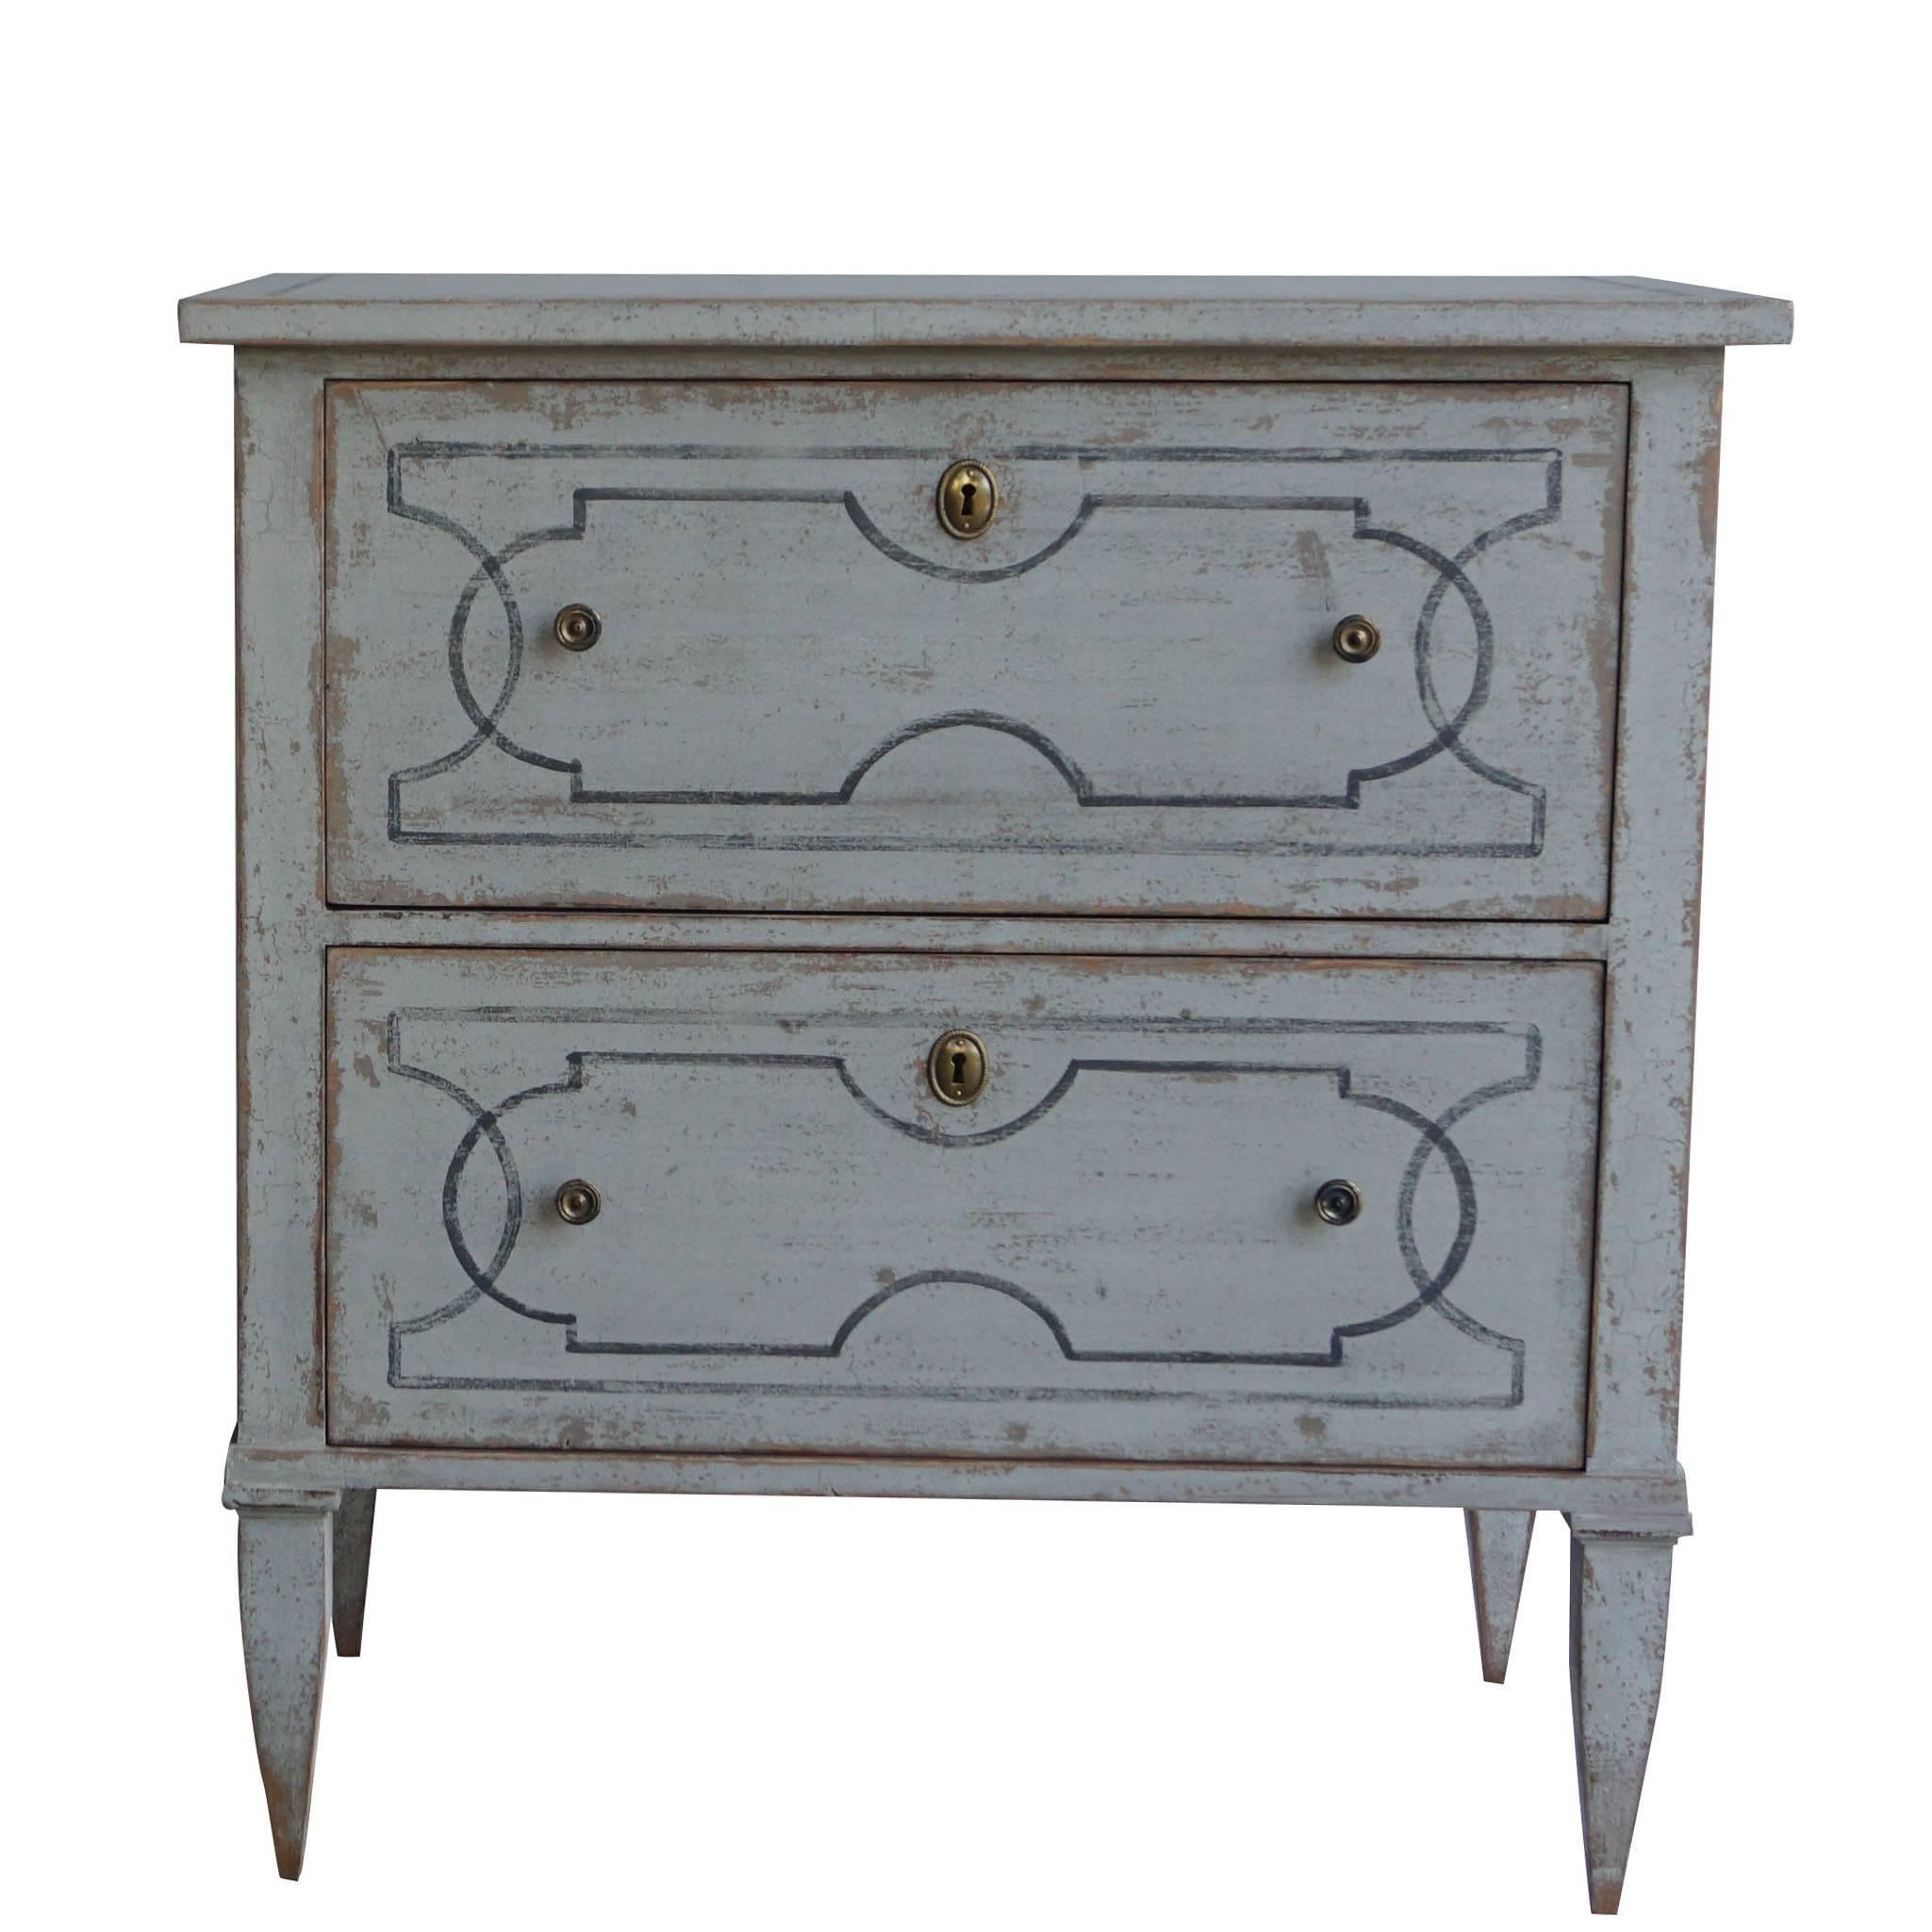 An antique pair of Swedish Gustavian chests made of hand carved pinewood and brass with two drawers, in good condition, perfect to be used as nightstands or end tables. White-blue painted finish with neoclassical design lines on the two drawers tops